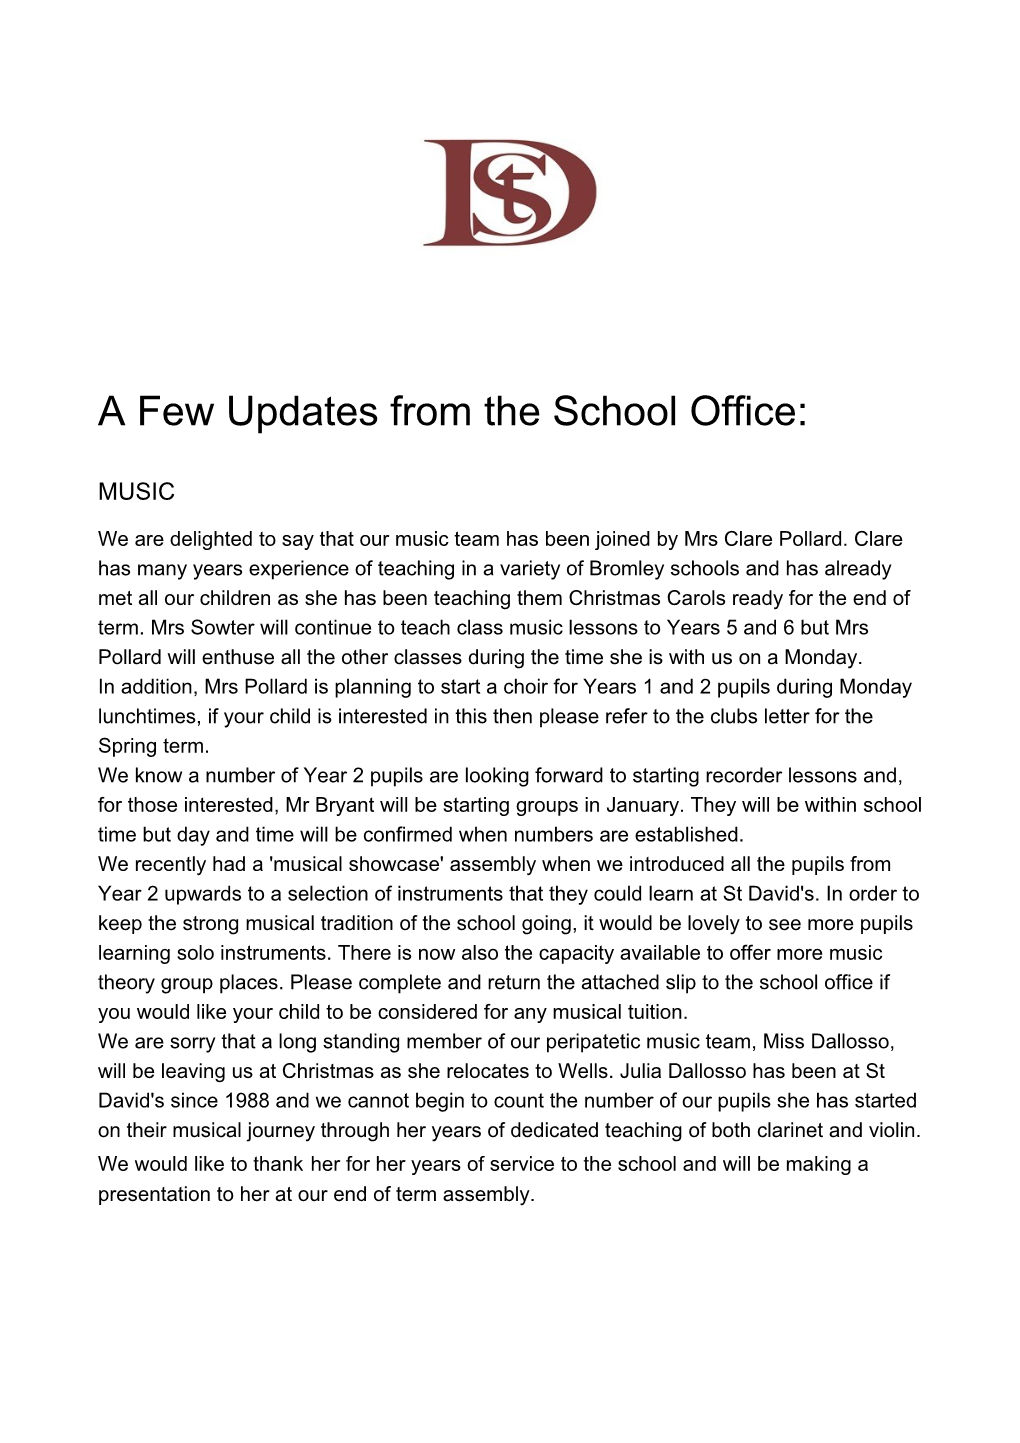 A Few Updates from the School Office